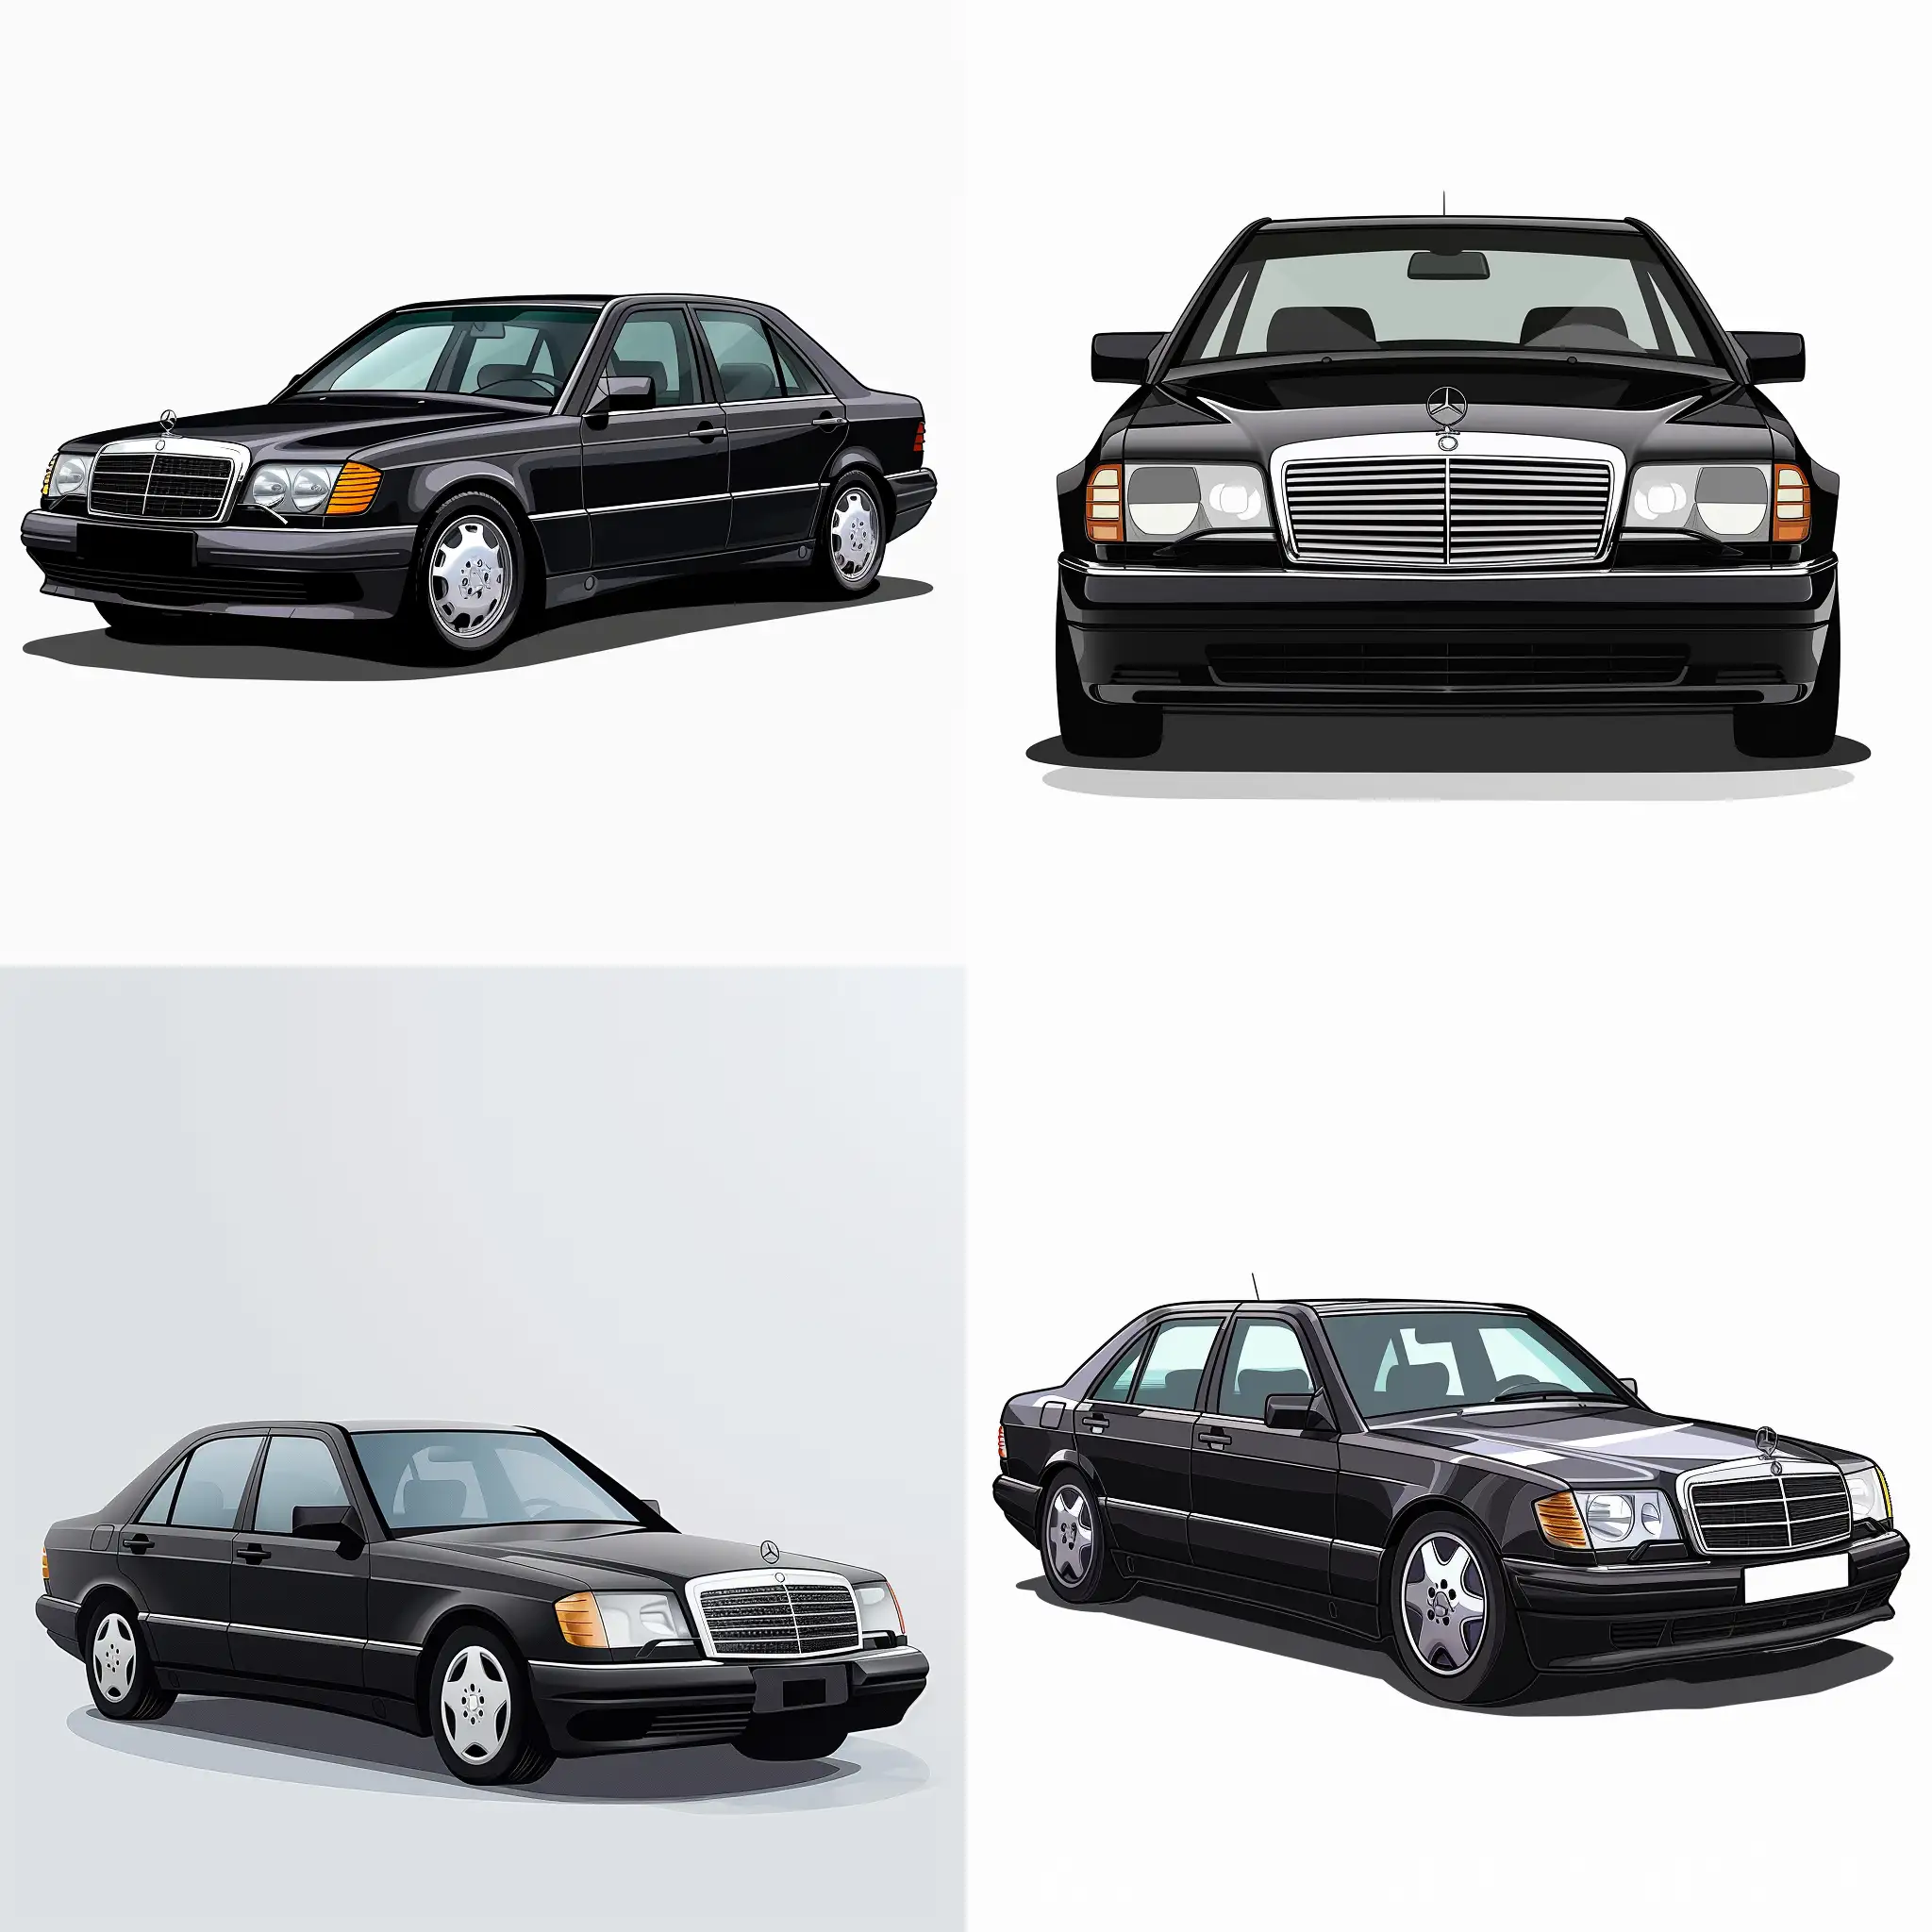 Minimalist-2D-Illustration-of-a-Black-Mercedes-Benz-W140-S320-on-Simple-White-Background